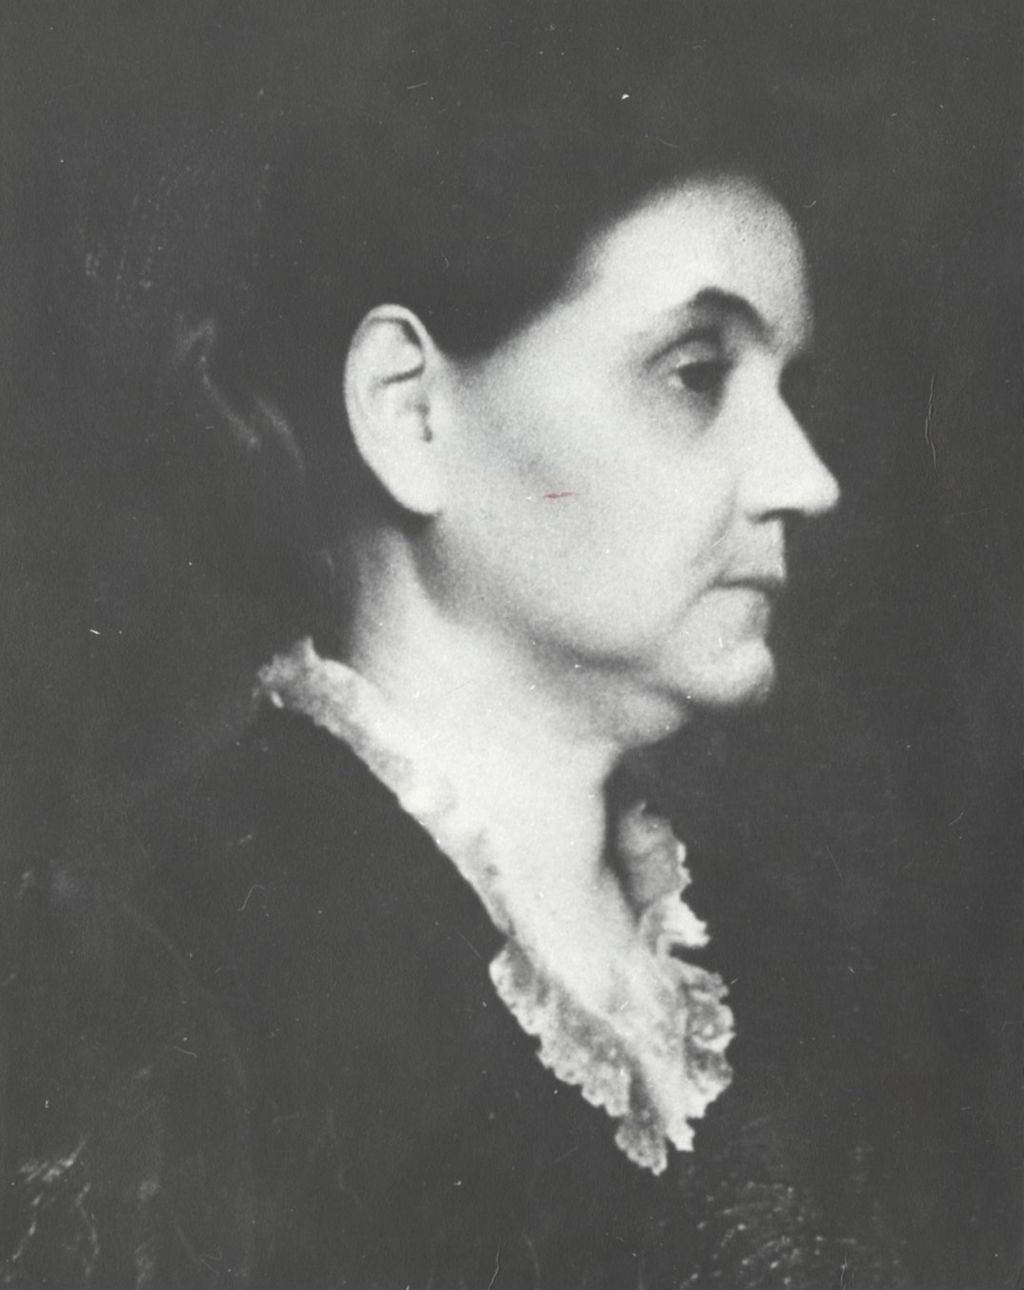 Photograph of an oil portrait of Jane Addams